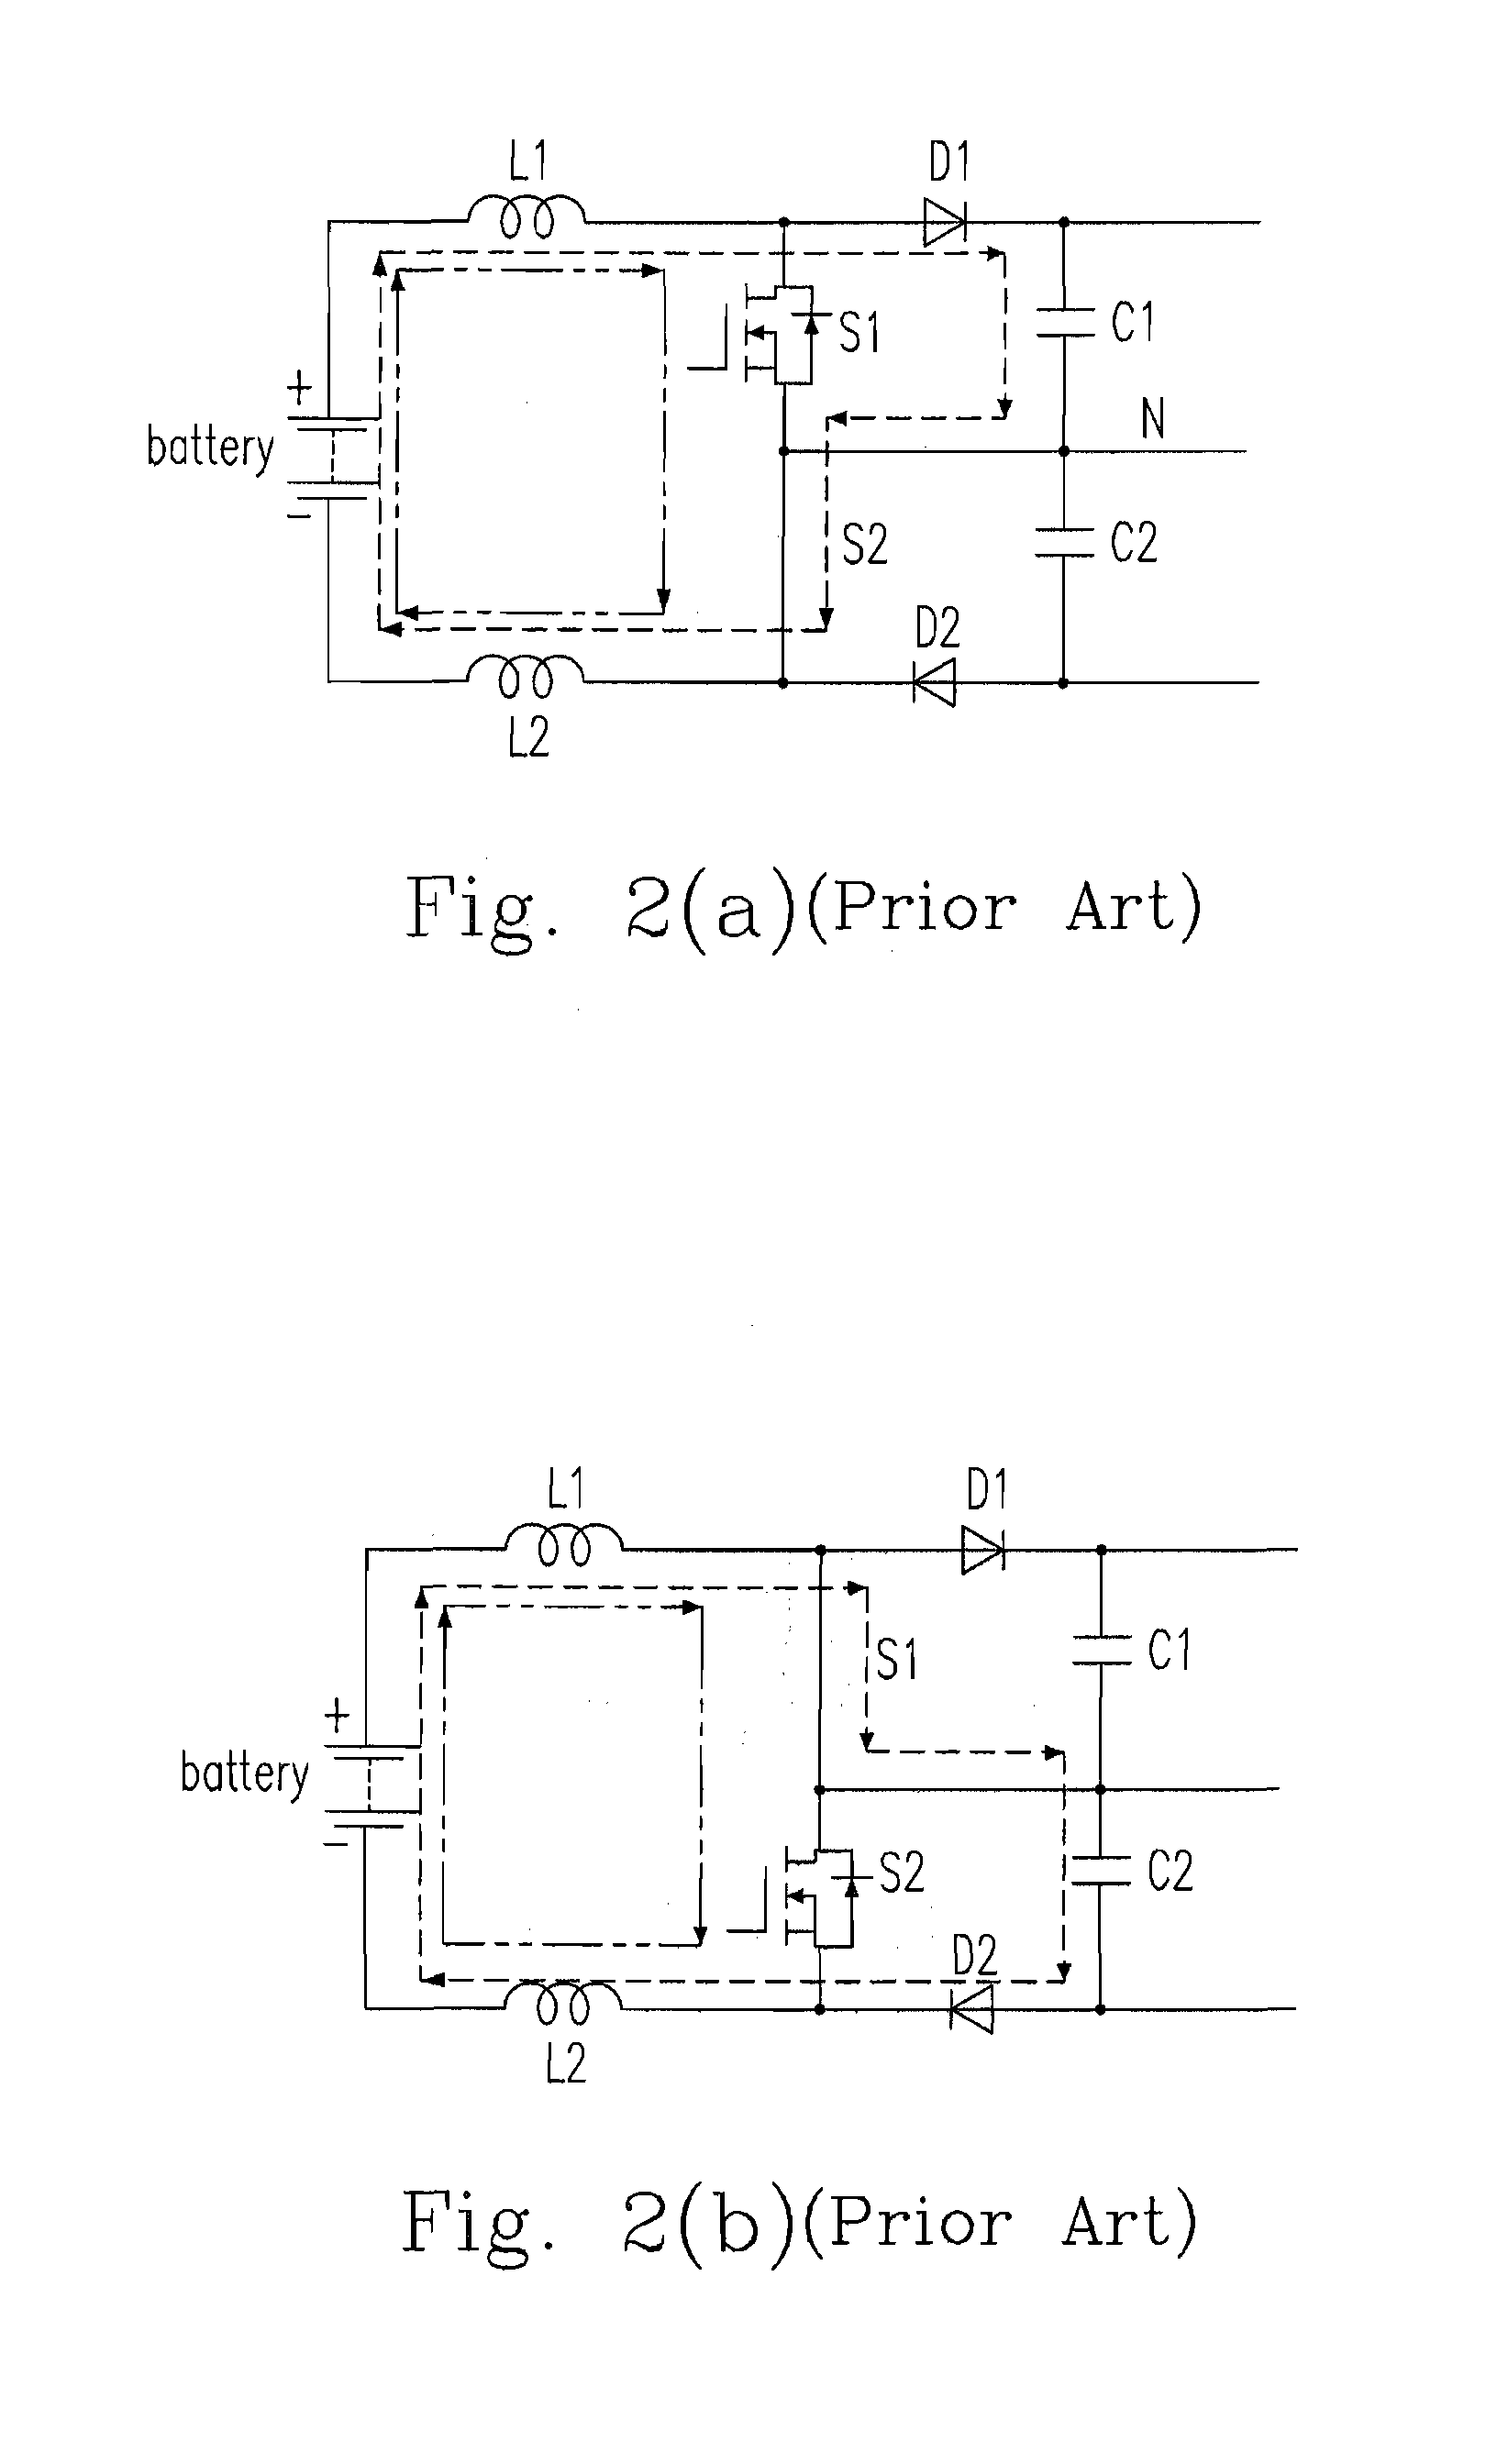 Parallel-connected uninterrupted power supply circuit